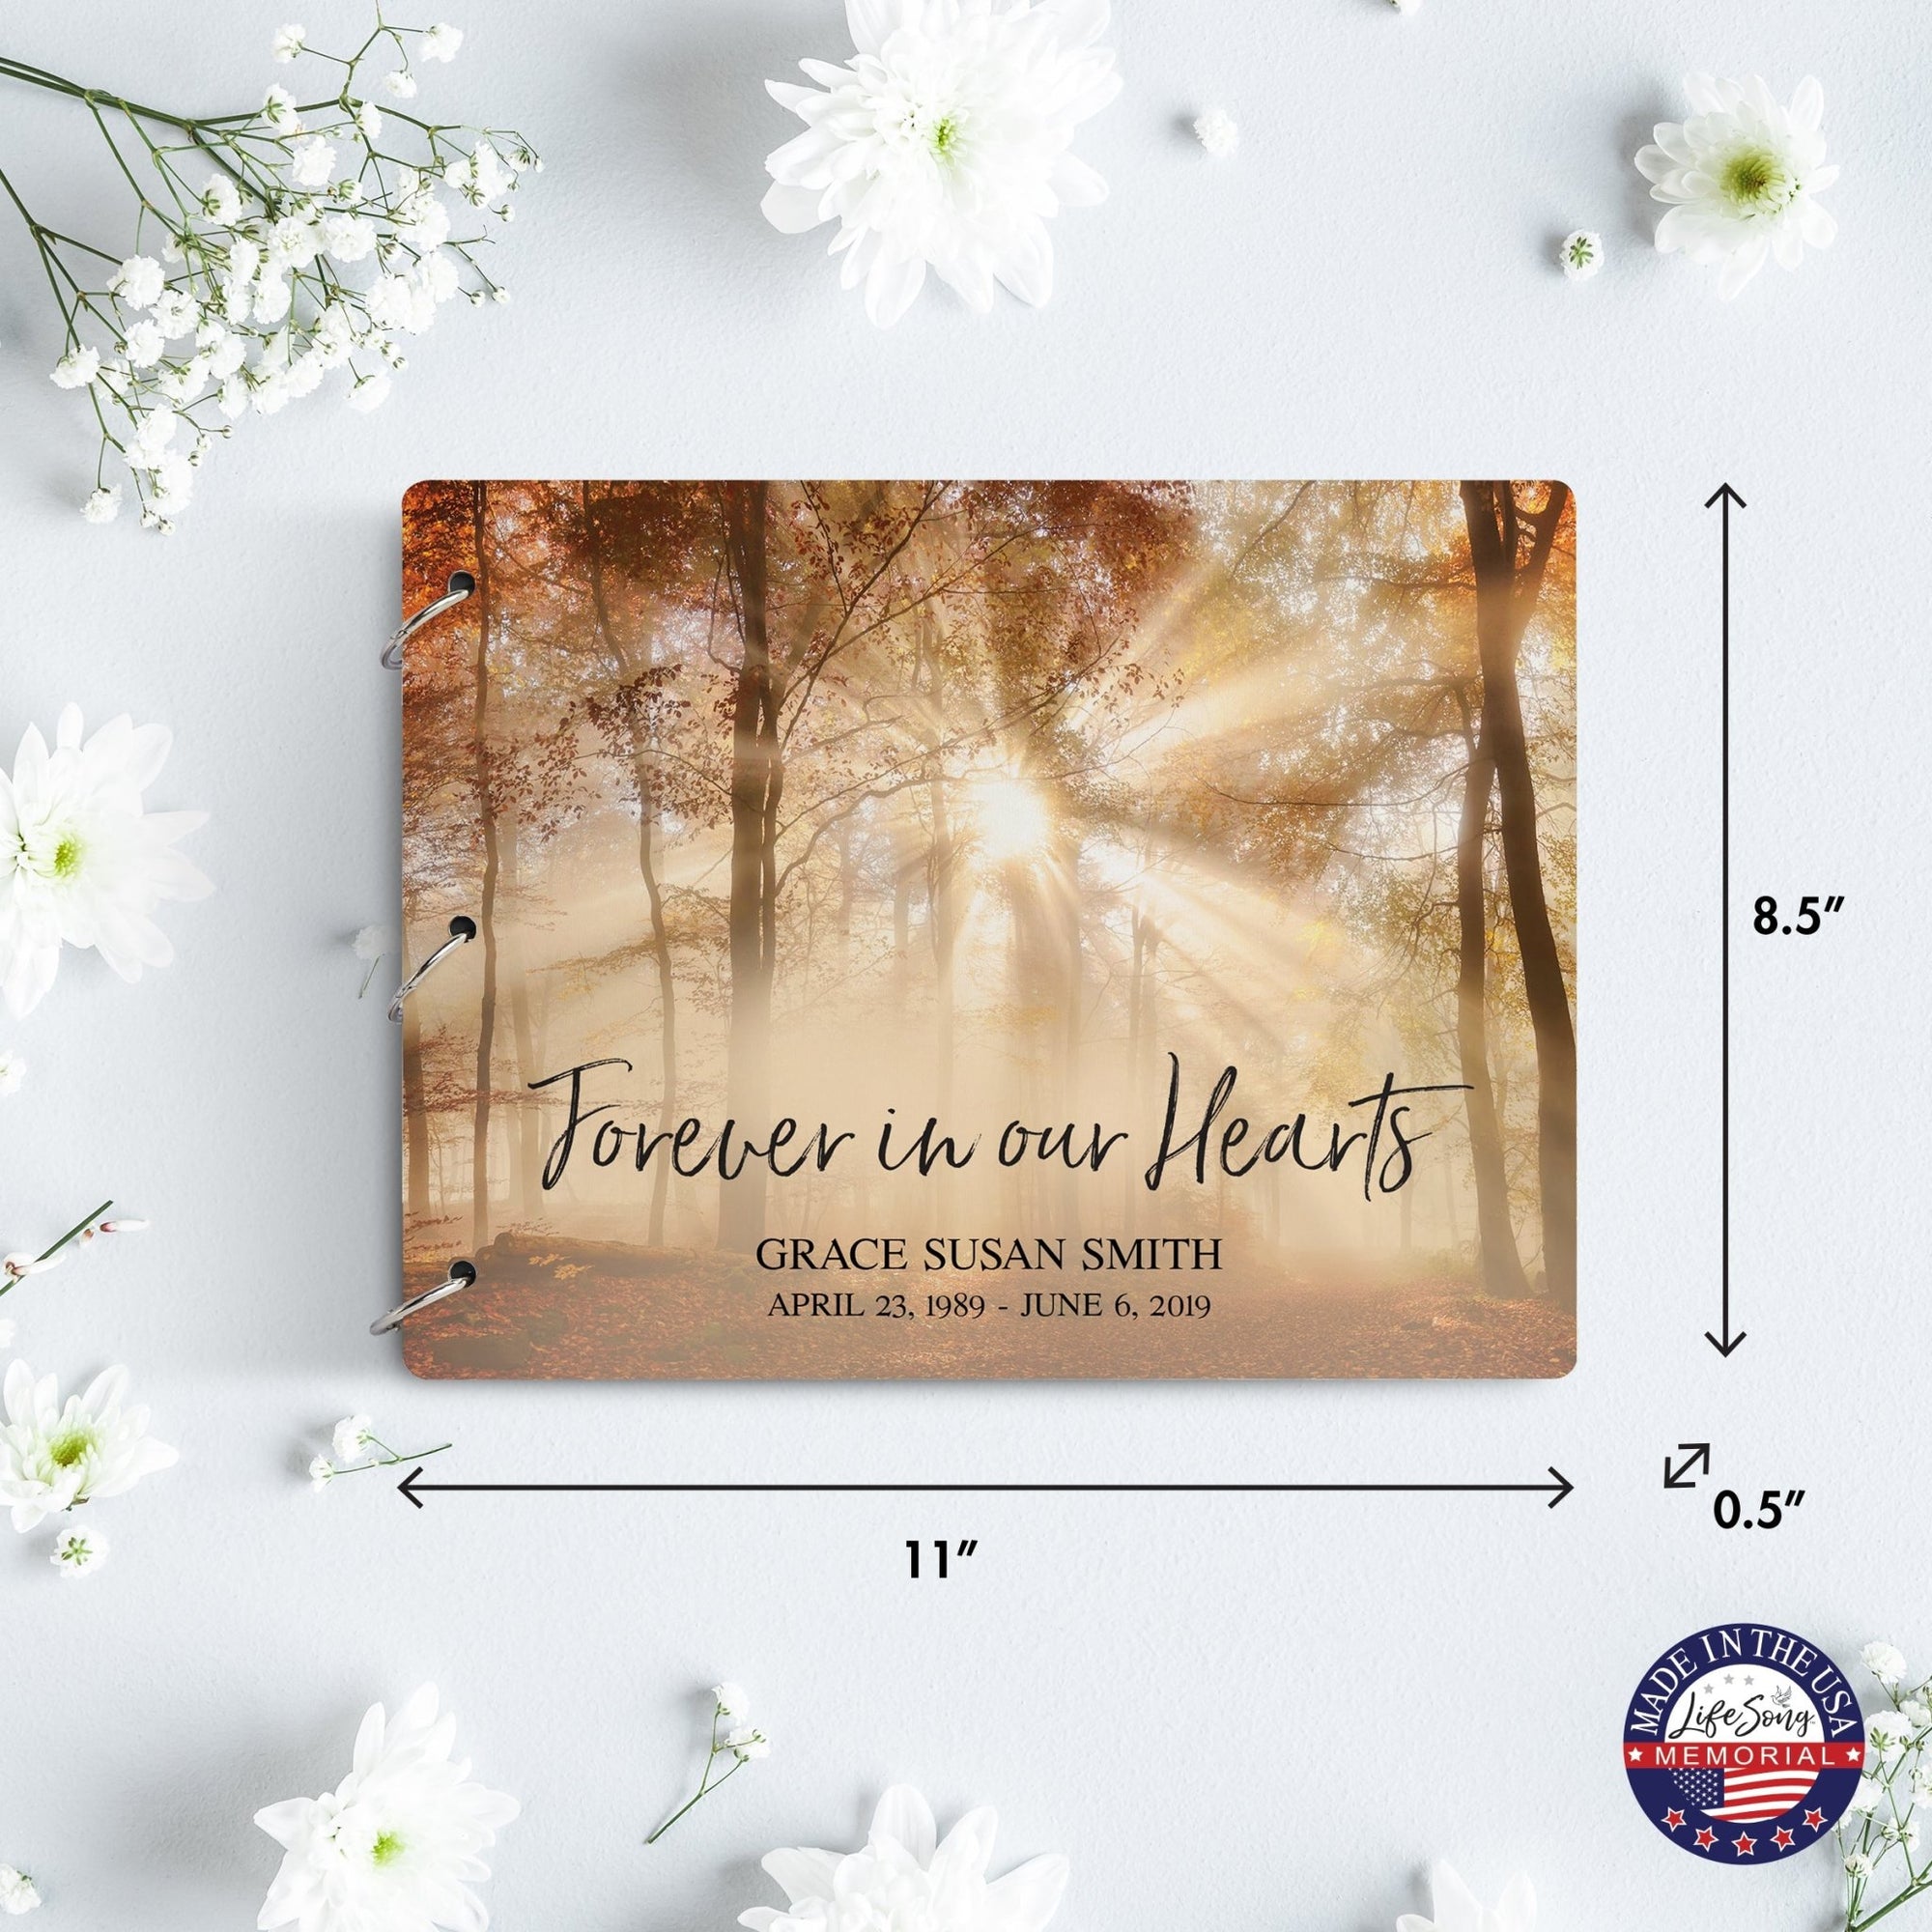 Personalized Celebration Of Life Funeral Guest Books For Memorial Services Registry With Wooden Cover - Forever In Our Hearts - LifeSong Milestones